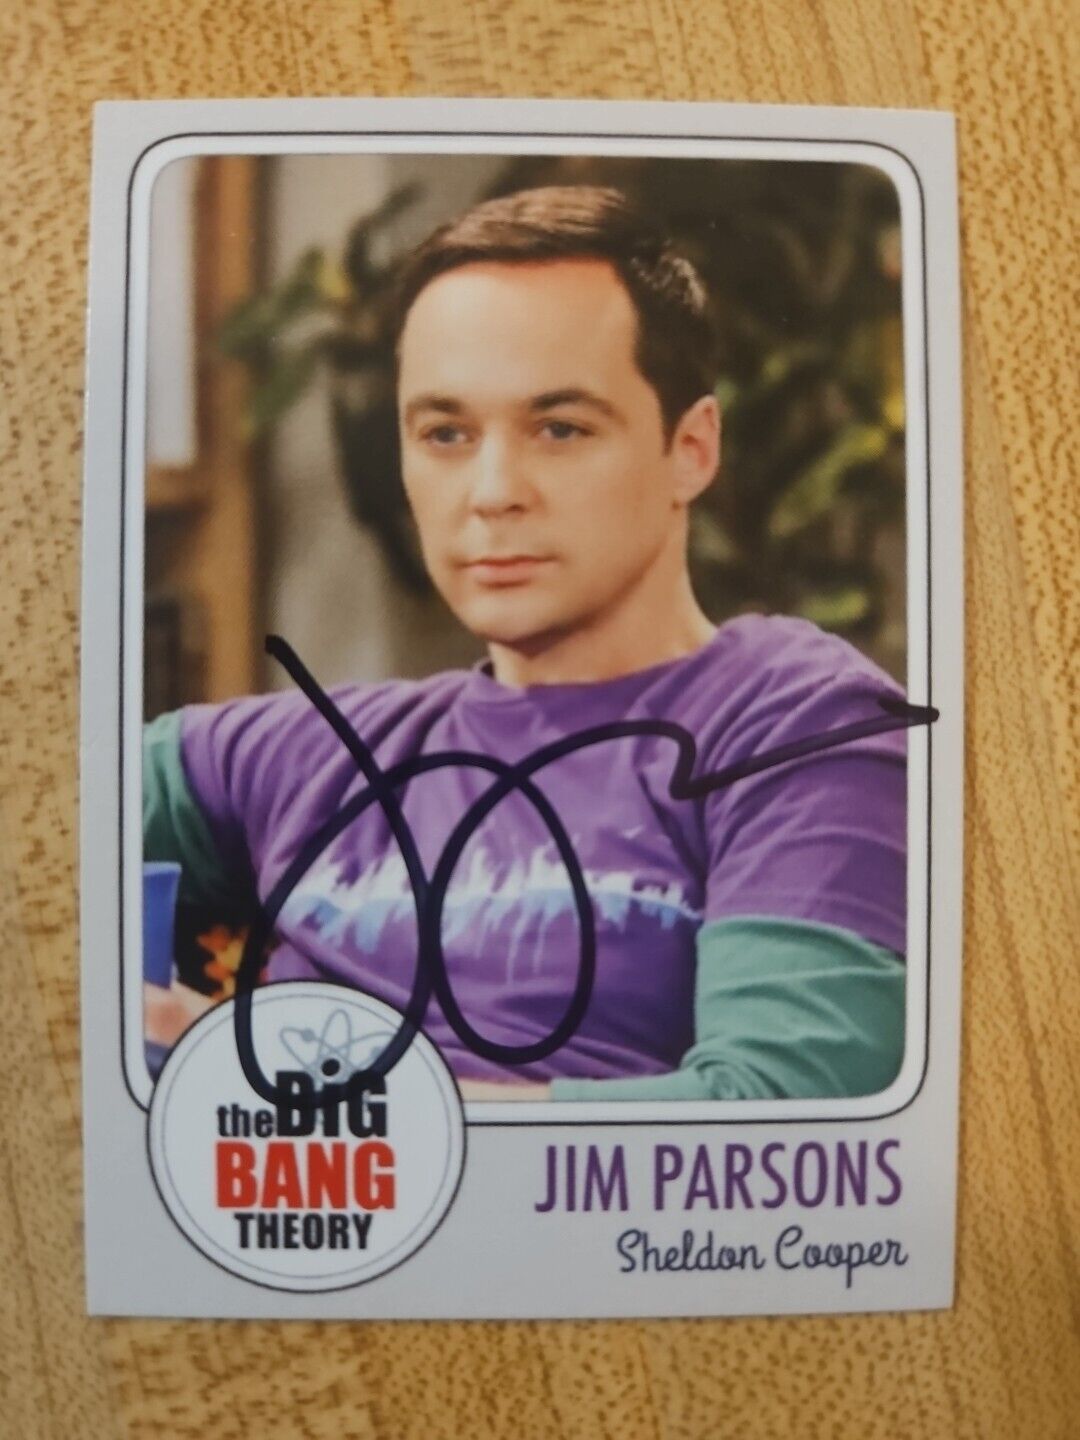 Jim Parson Custom Signed Card - Sheldon Cooper From The Big Bang Theory